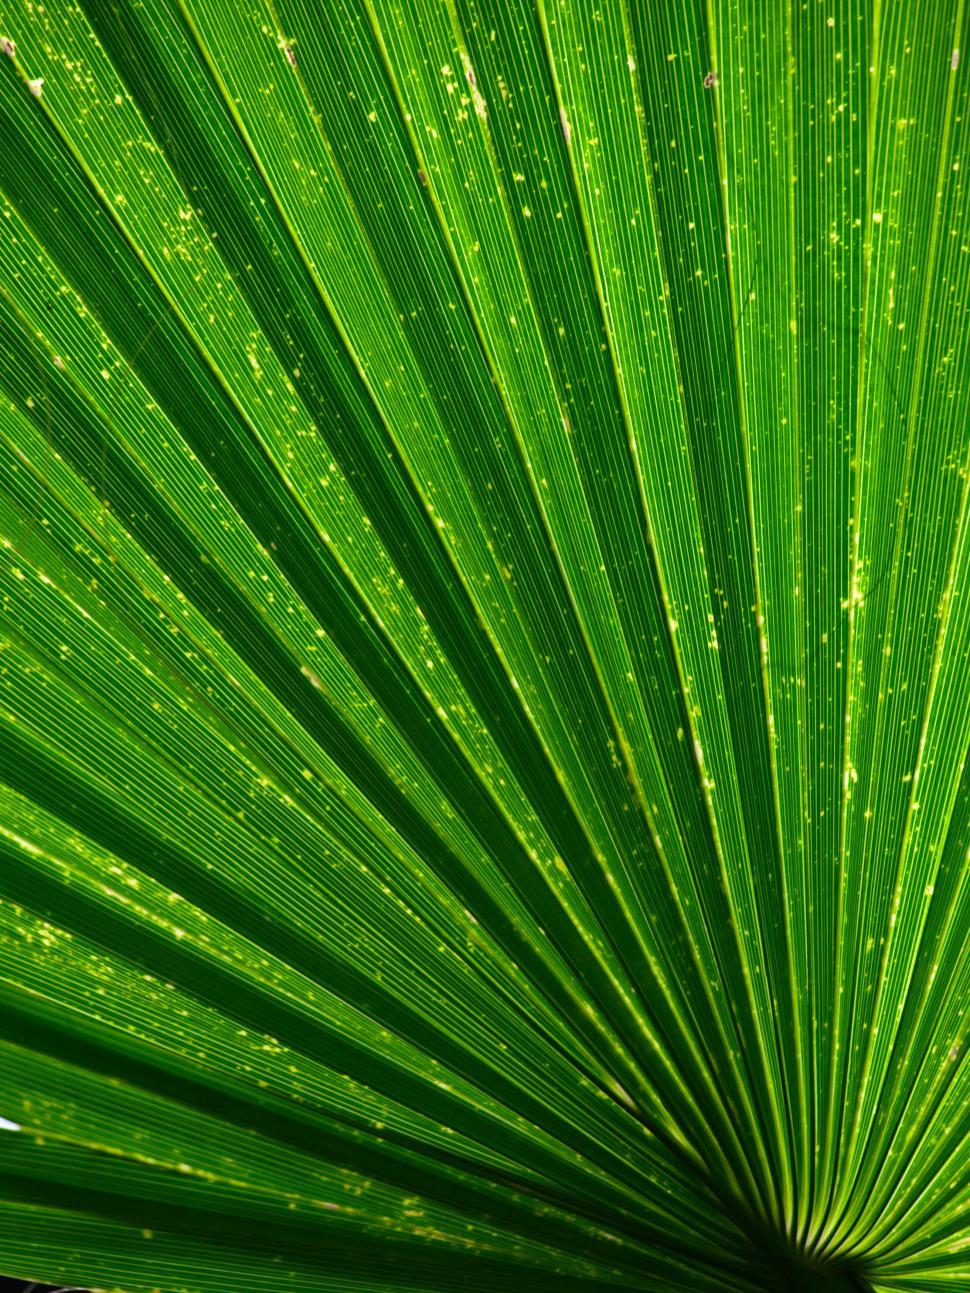 Free Image of Vivid green palm leaf pattern close-up view 